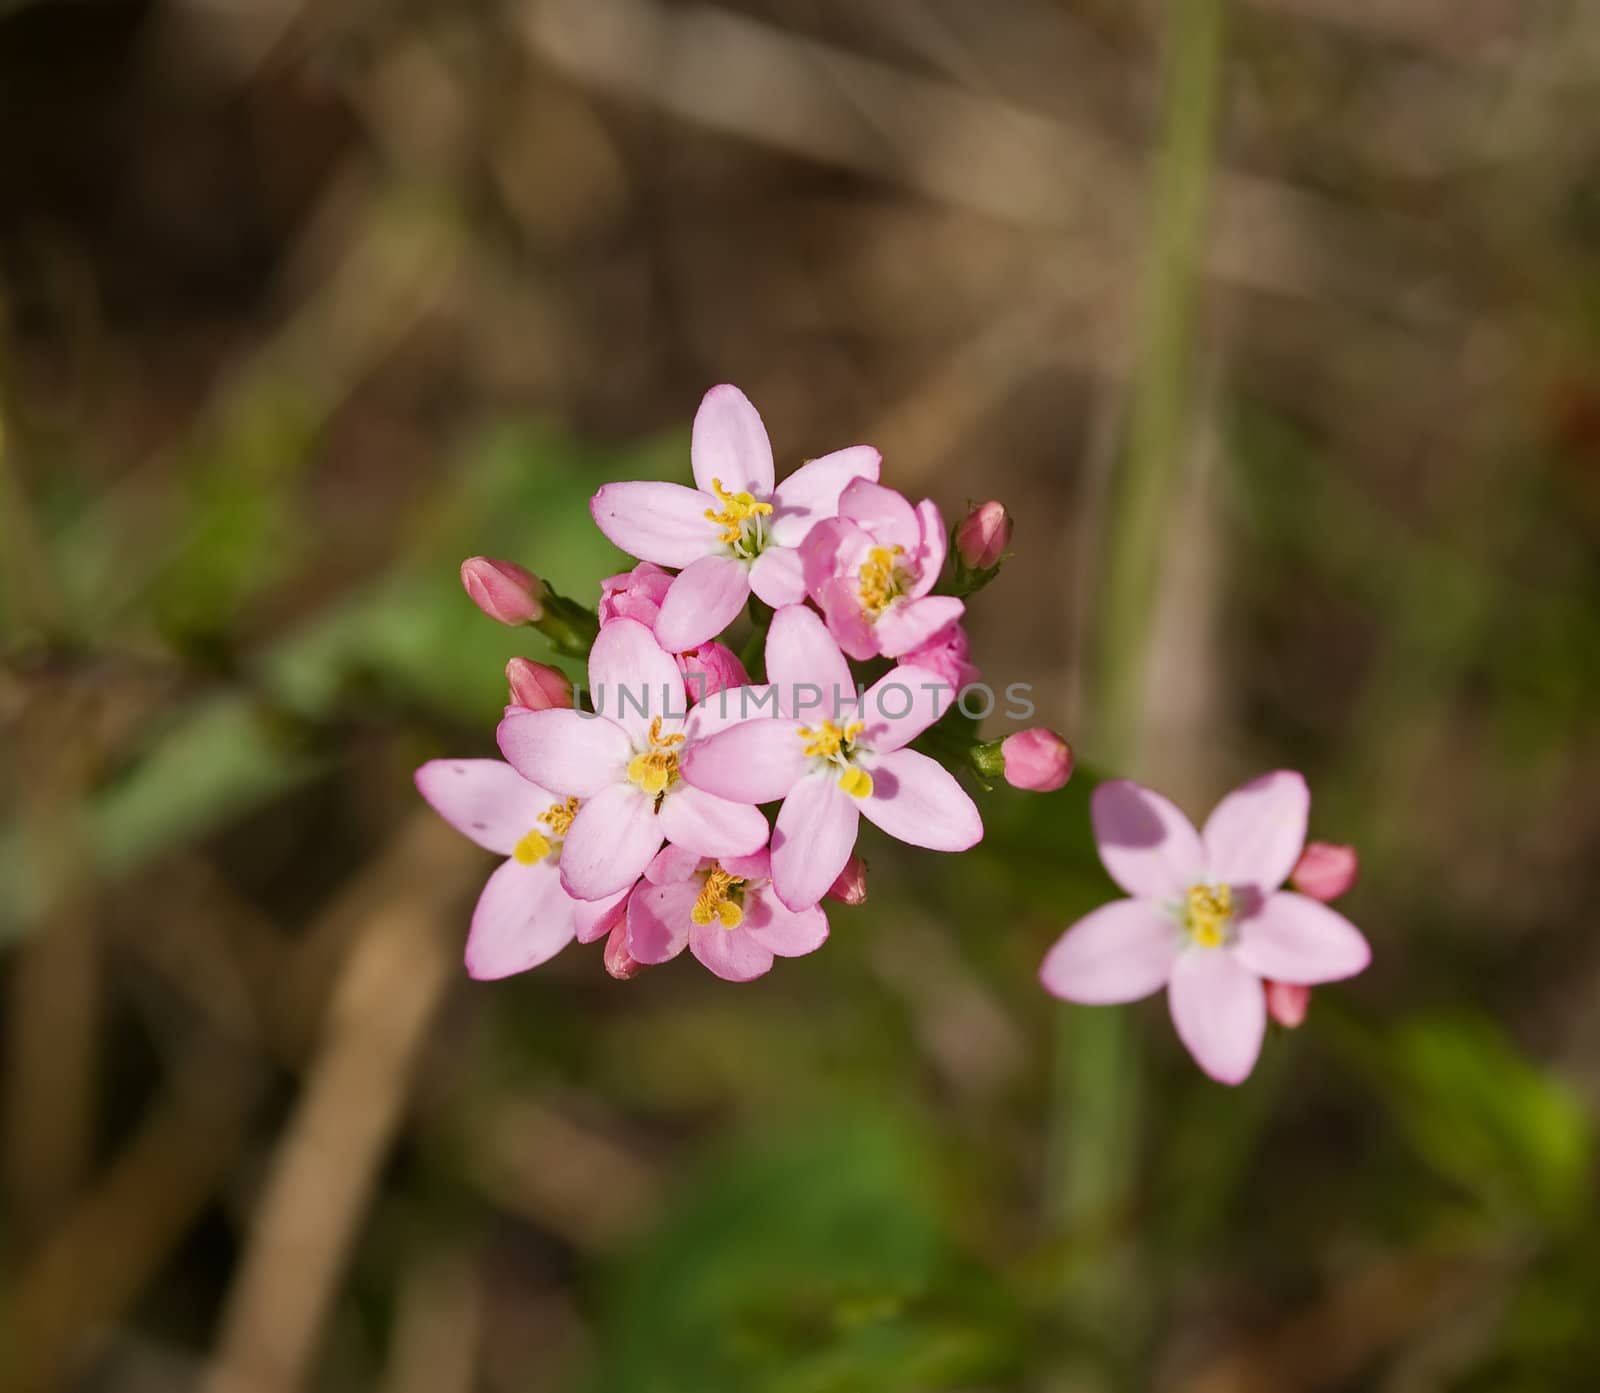 Common Centaury flower. Plant traditionally used in herbal remedies.